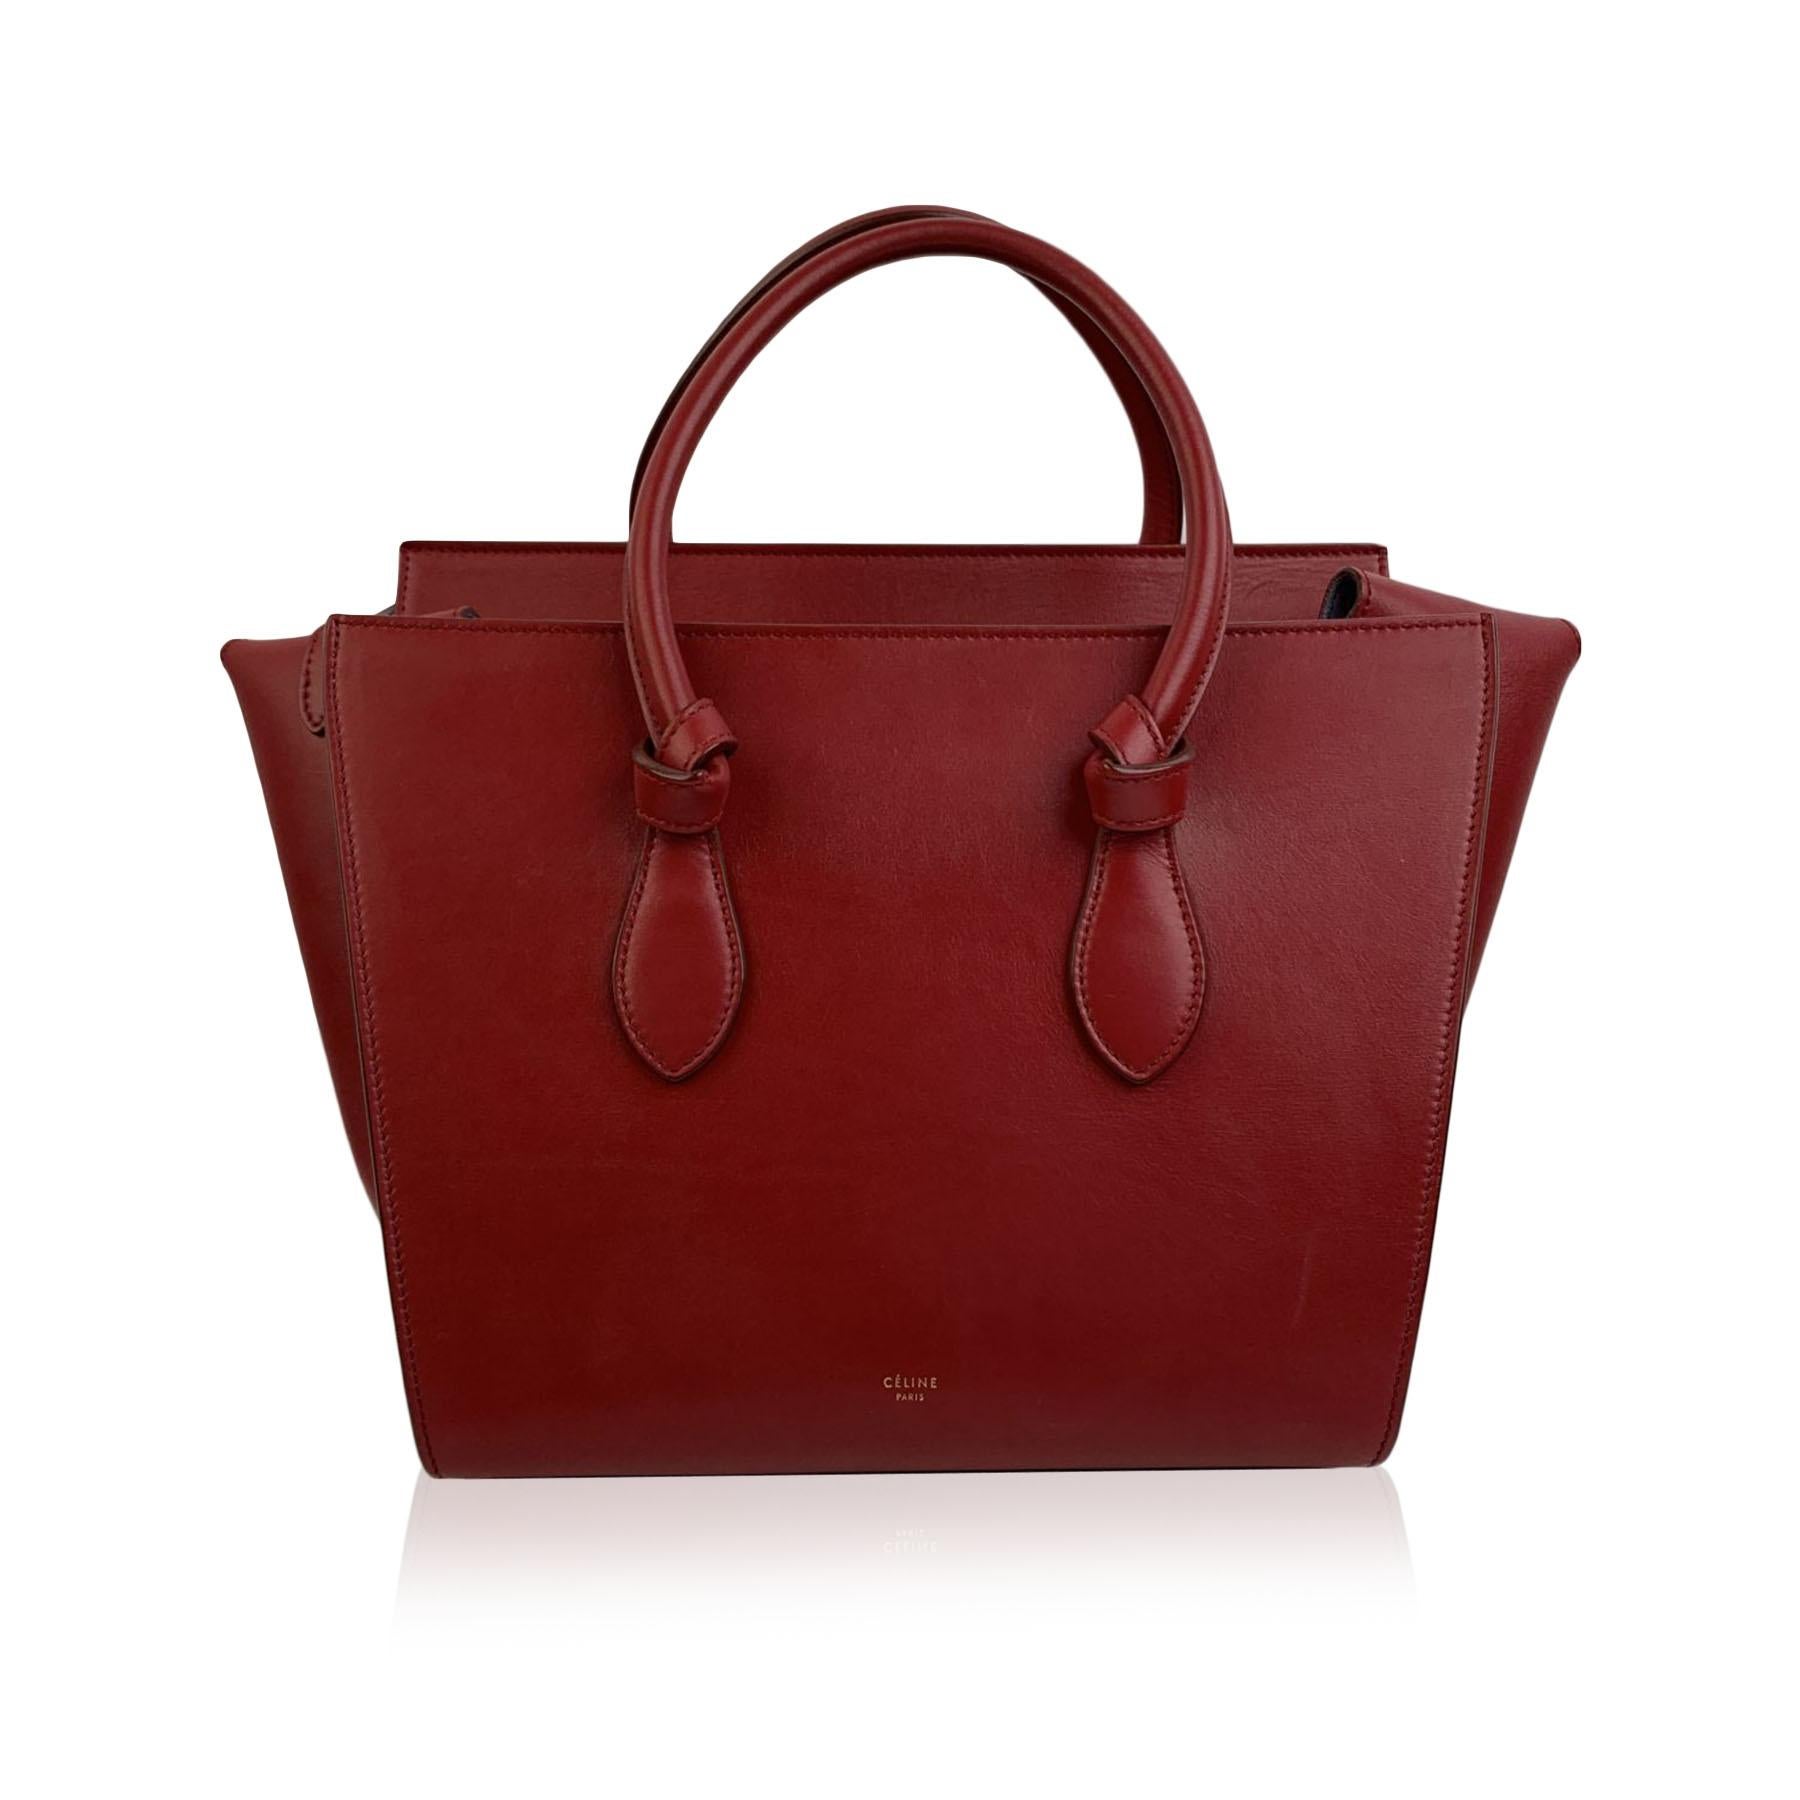 This beautiful Bag will come with a Certificate of Authenticity provided by Entrupy, leading International Fashion Authenticators. The certificate will be provided at no further cost.

Celine Tie Knot Bag in burgundy leather. The bag features a